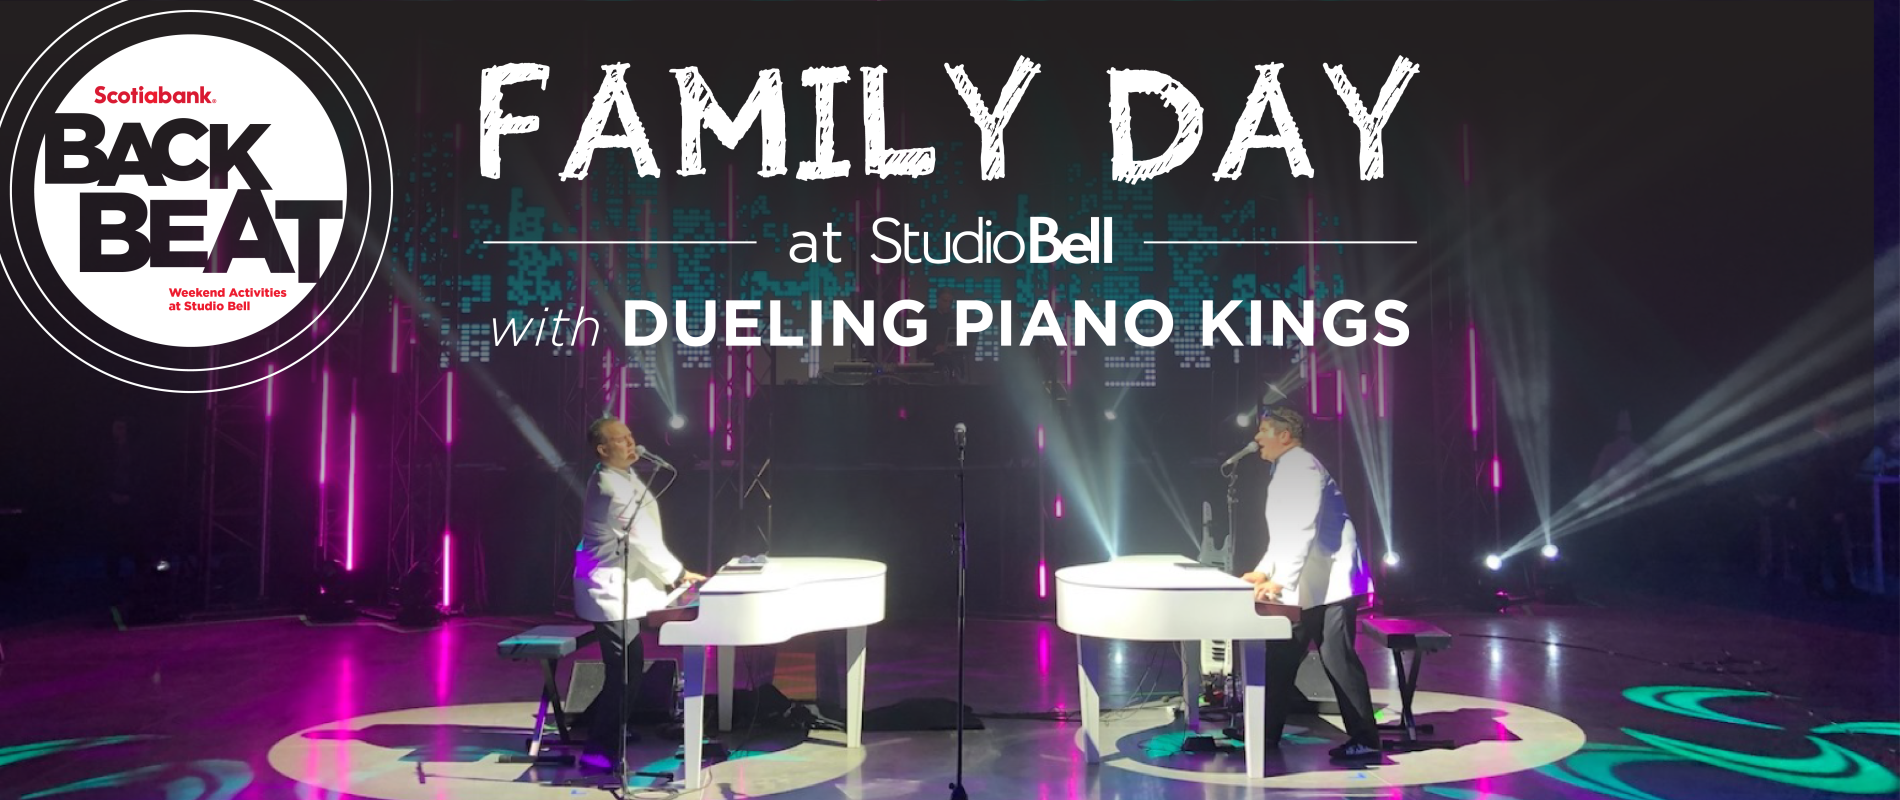 Family Day at Studio Bell to Feature Dueling Piano Kings and Tons of Family Fun on February 21